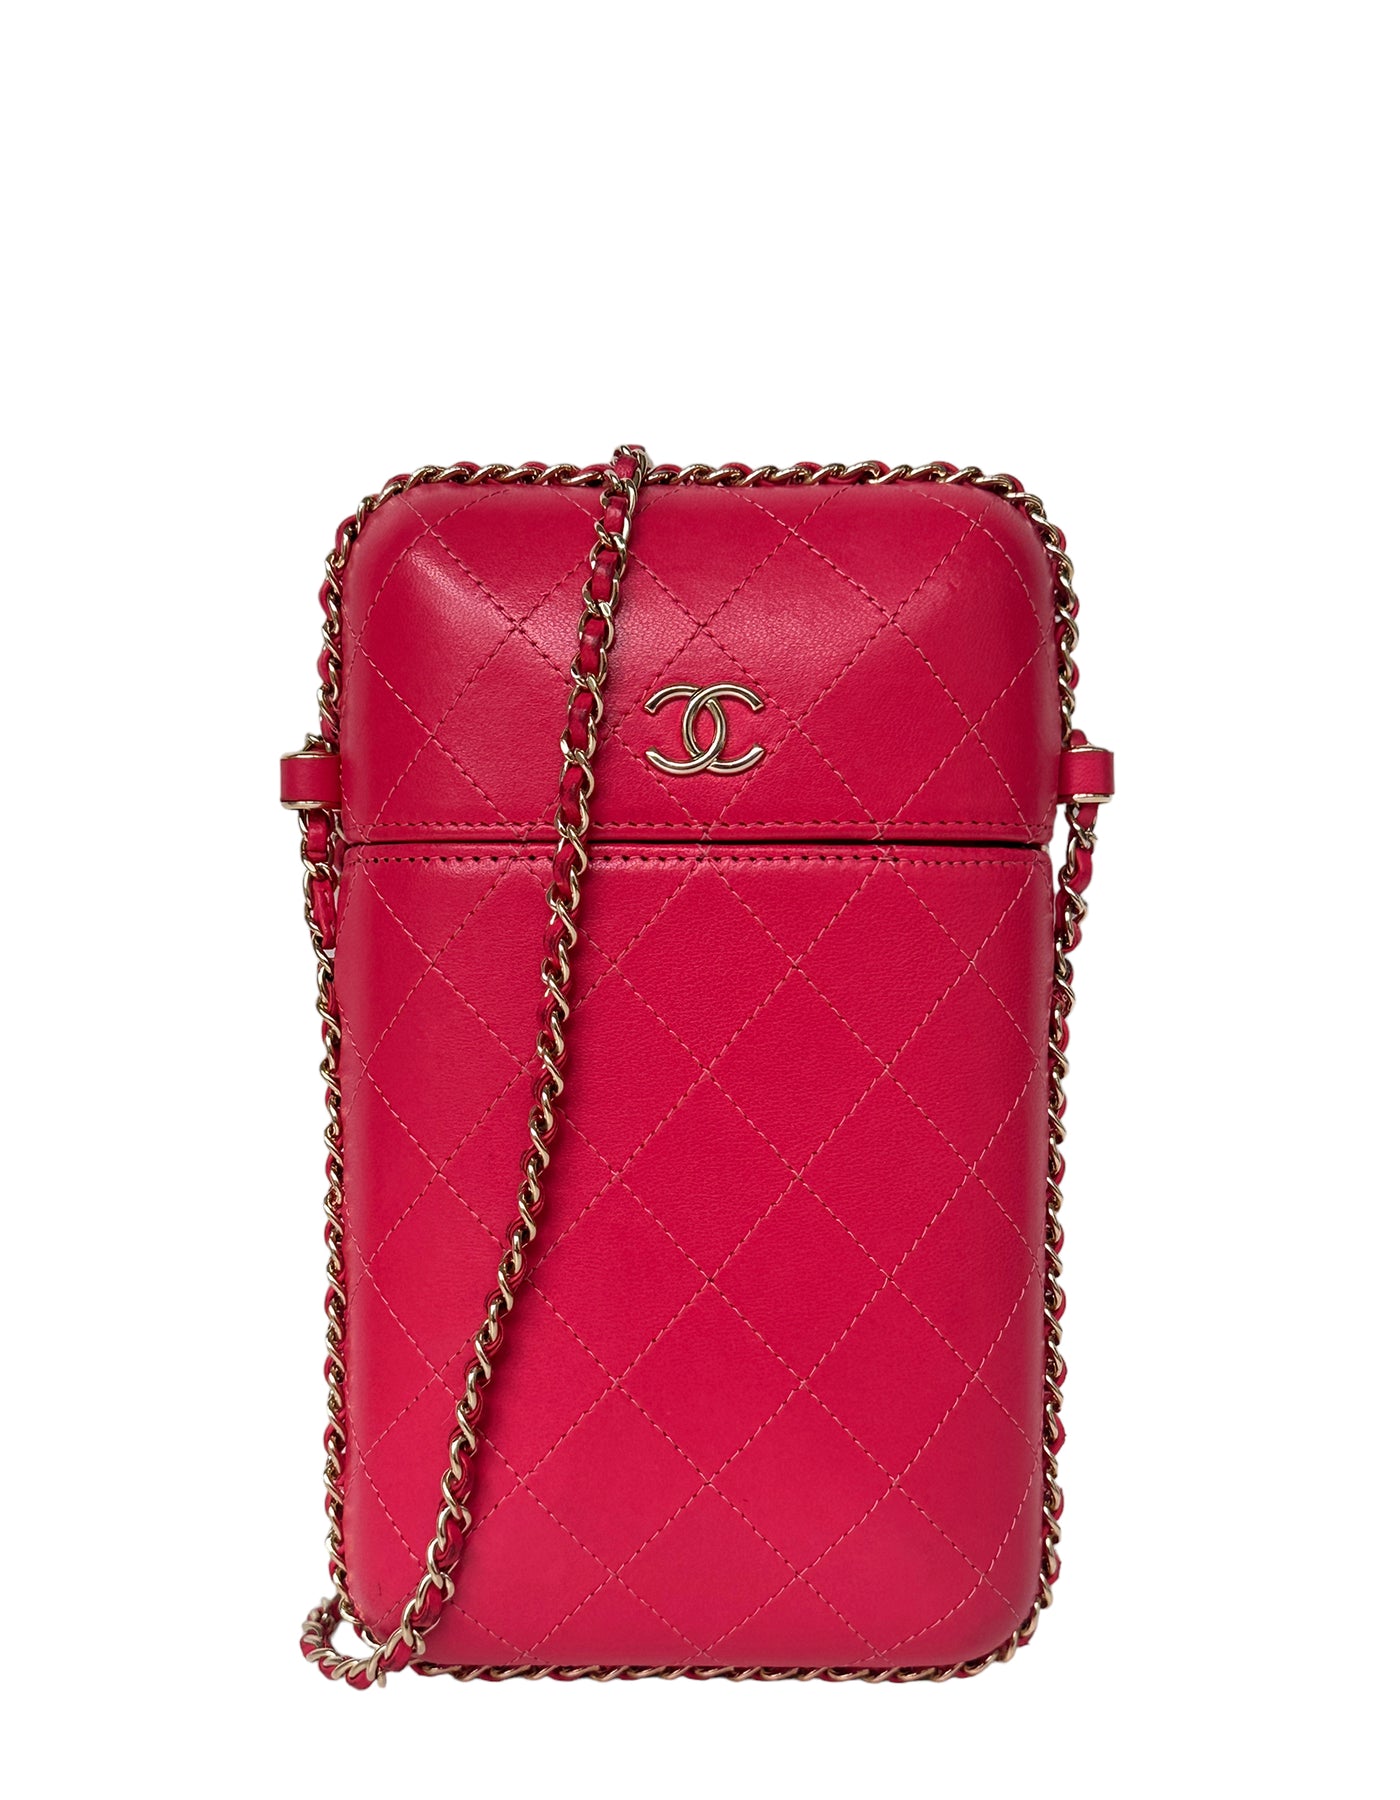 Chanel Vintage Pink Caviar Timeless Wallet On Chain WOC For Sale